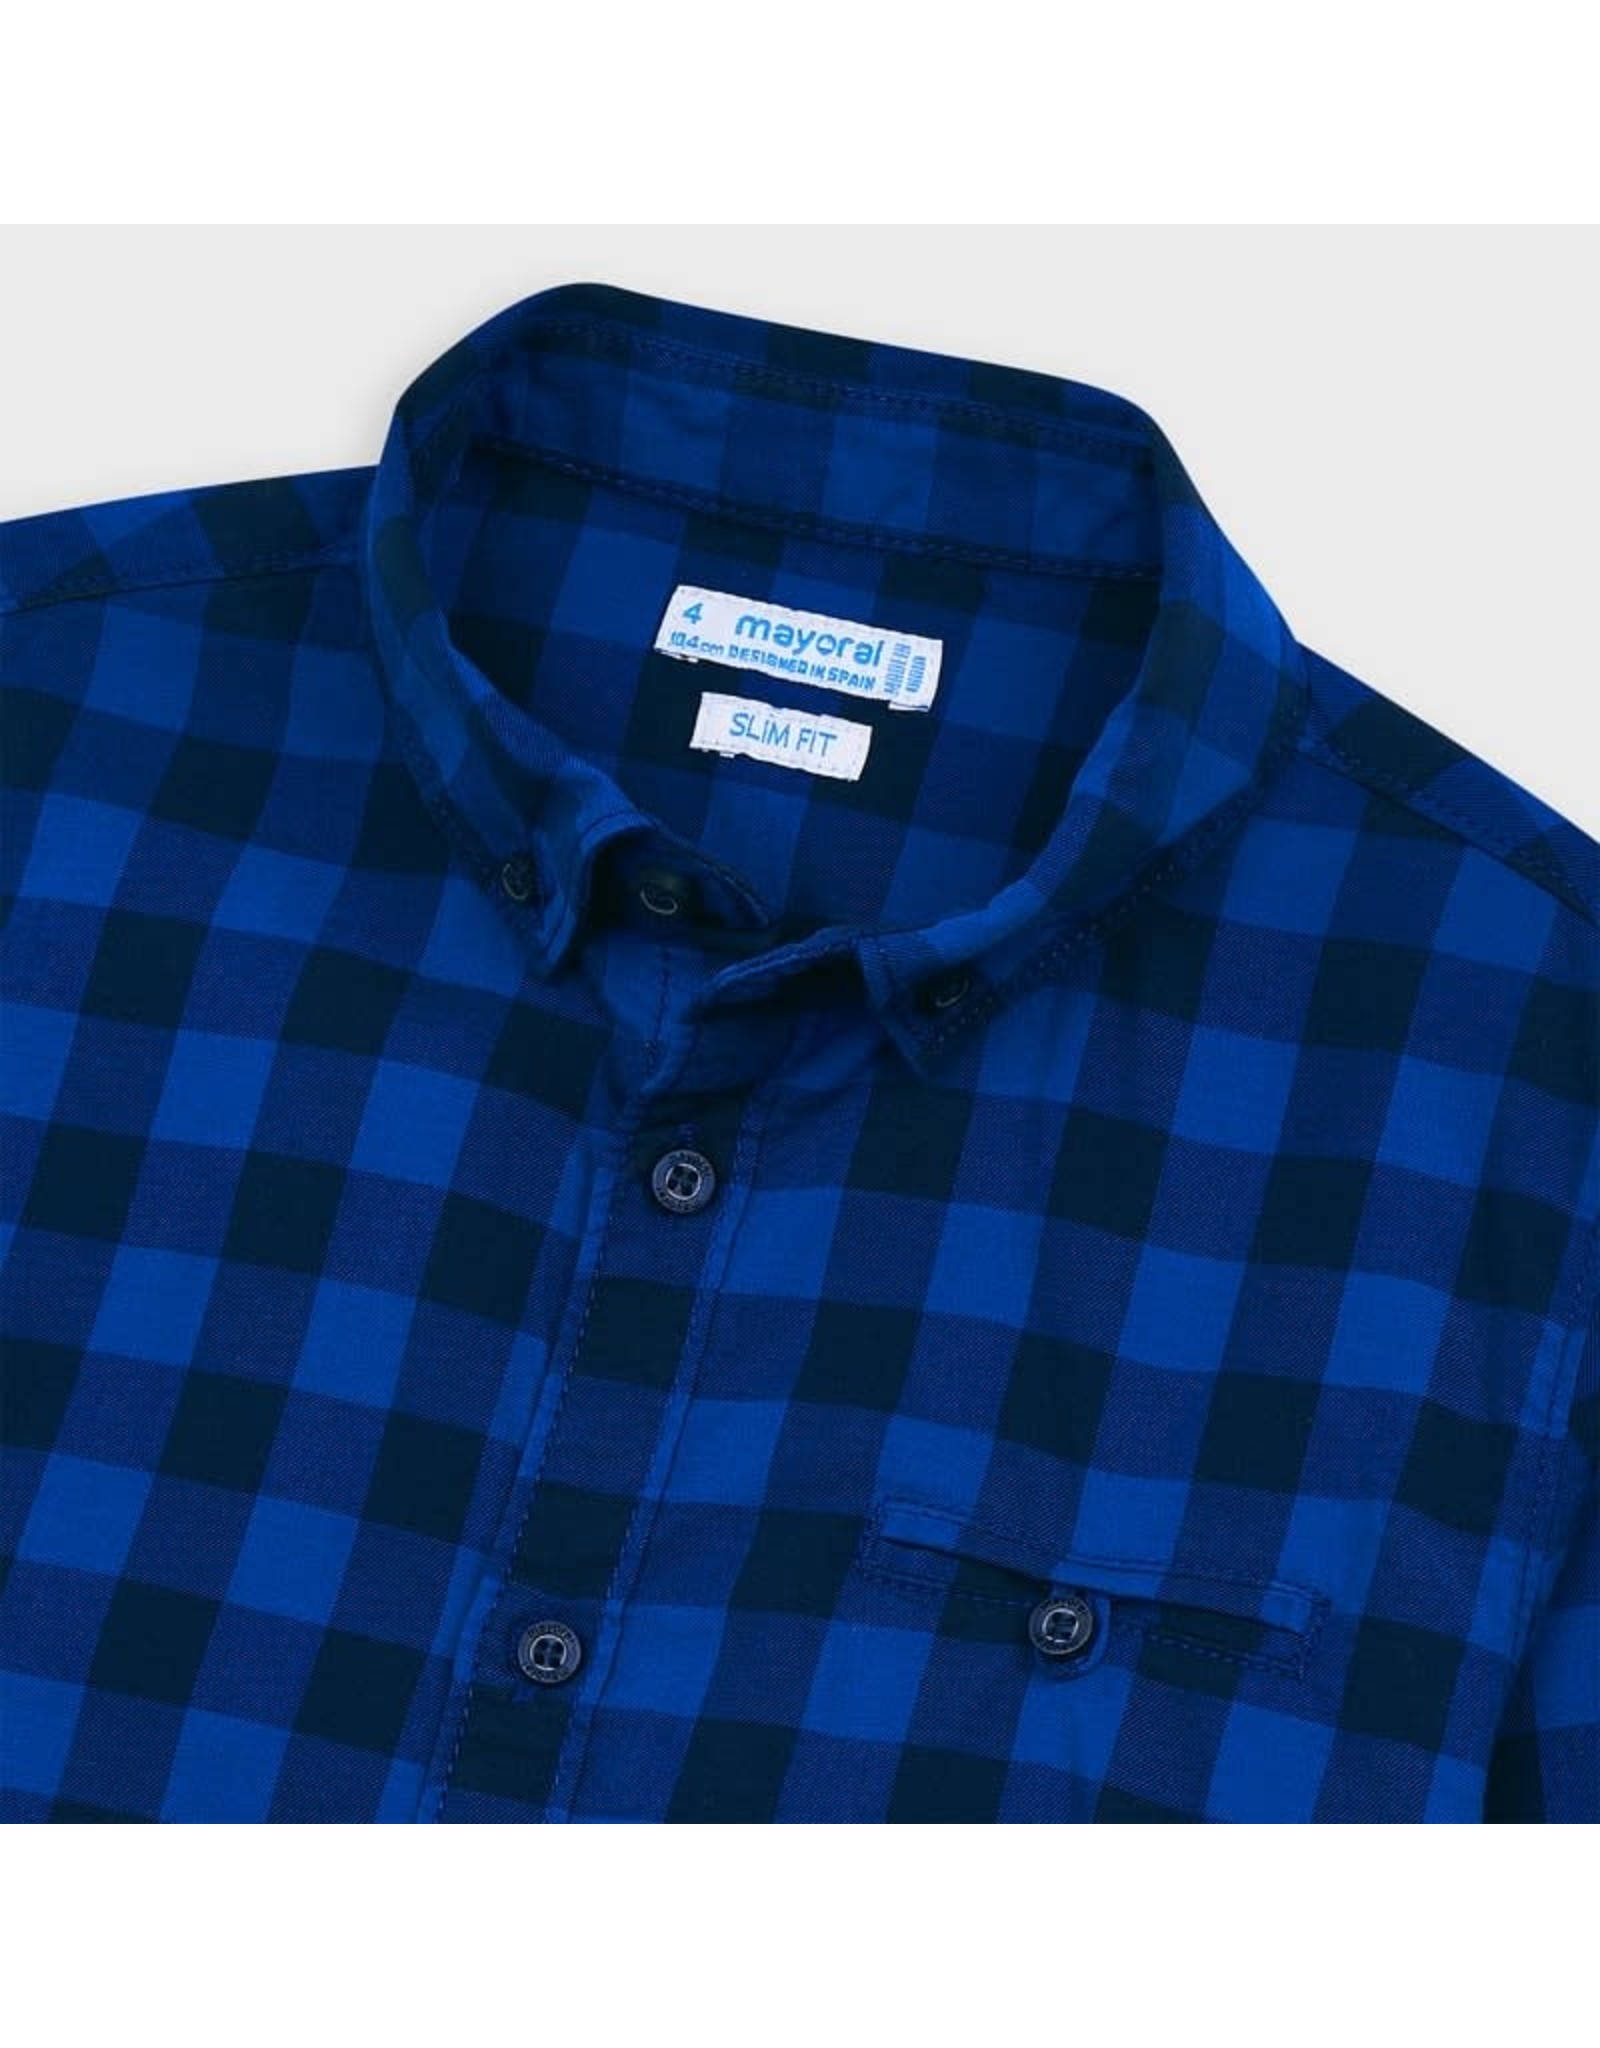 Mayoral Flannel Long Sleeve Button Up